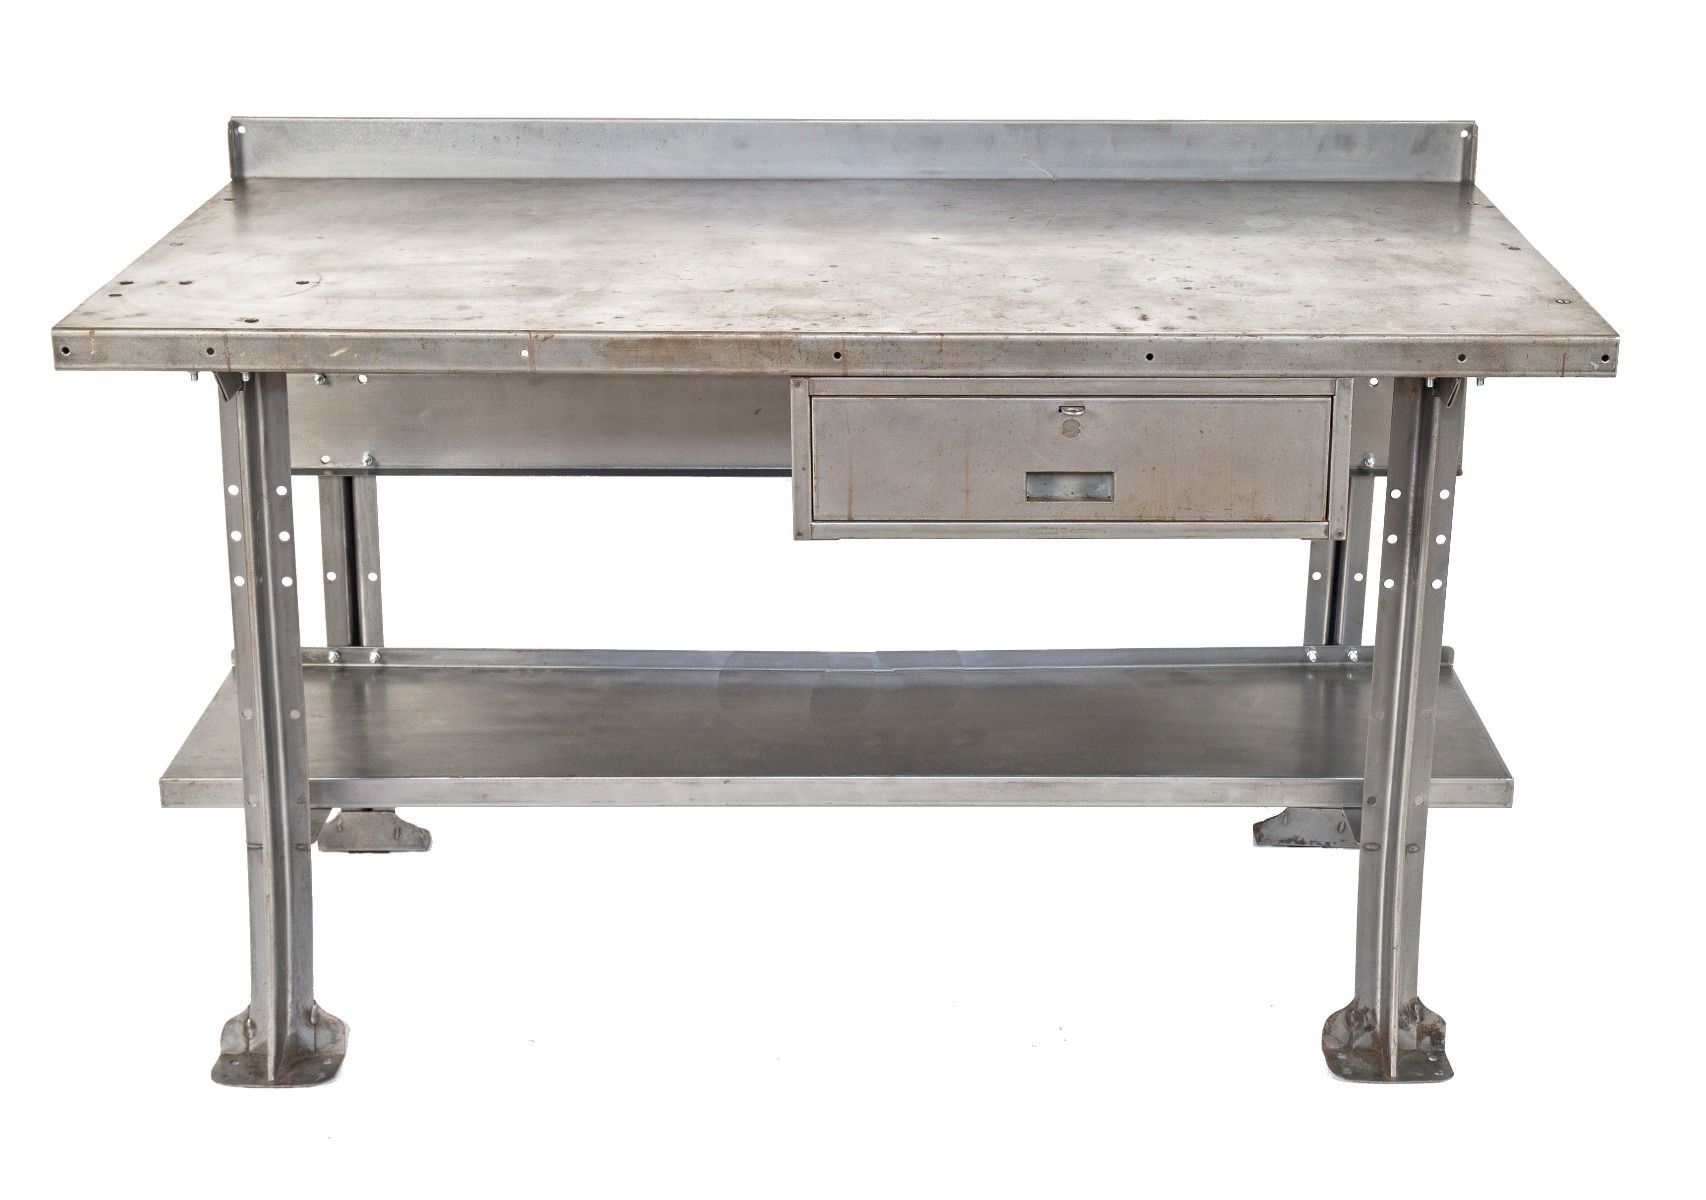 refinished pressed and folded antique american industrial pollard or lyon salvaged chicago workbench